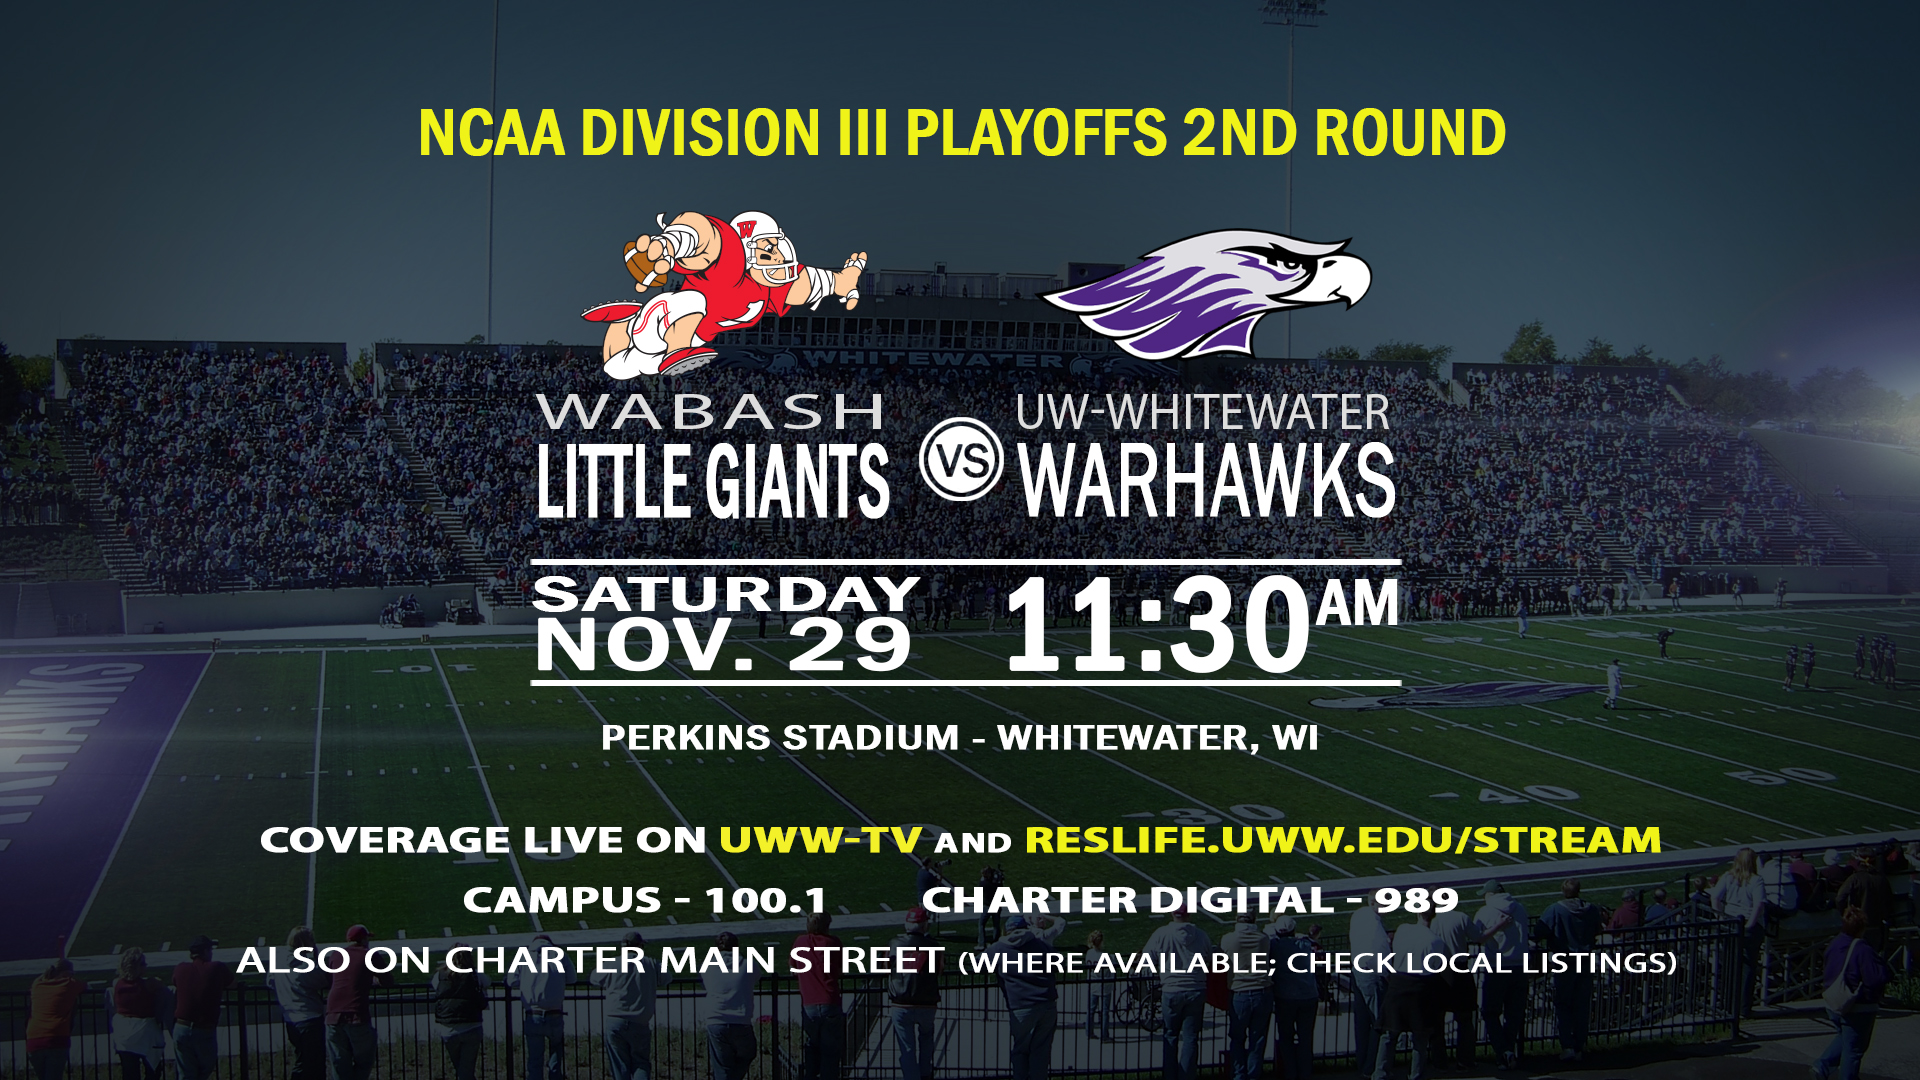 #1 UW-Whitewater to Host #14 Wabash in Second Round of D3 Football Playoffs